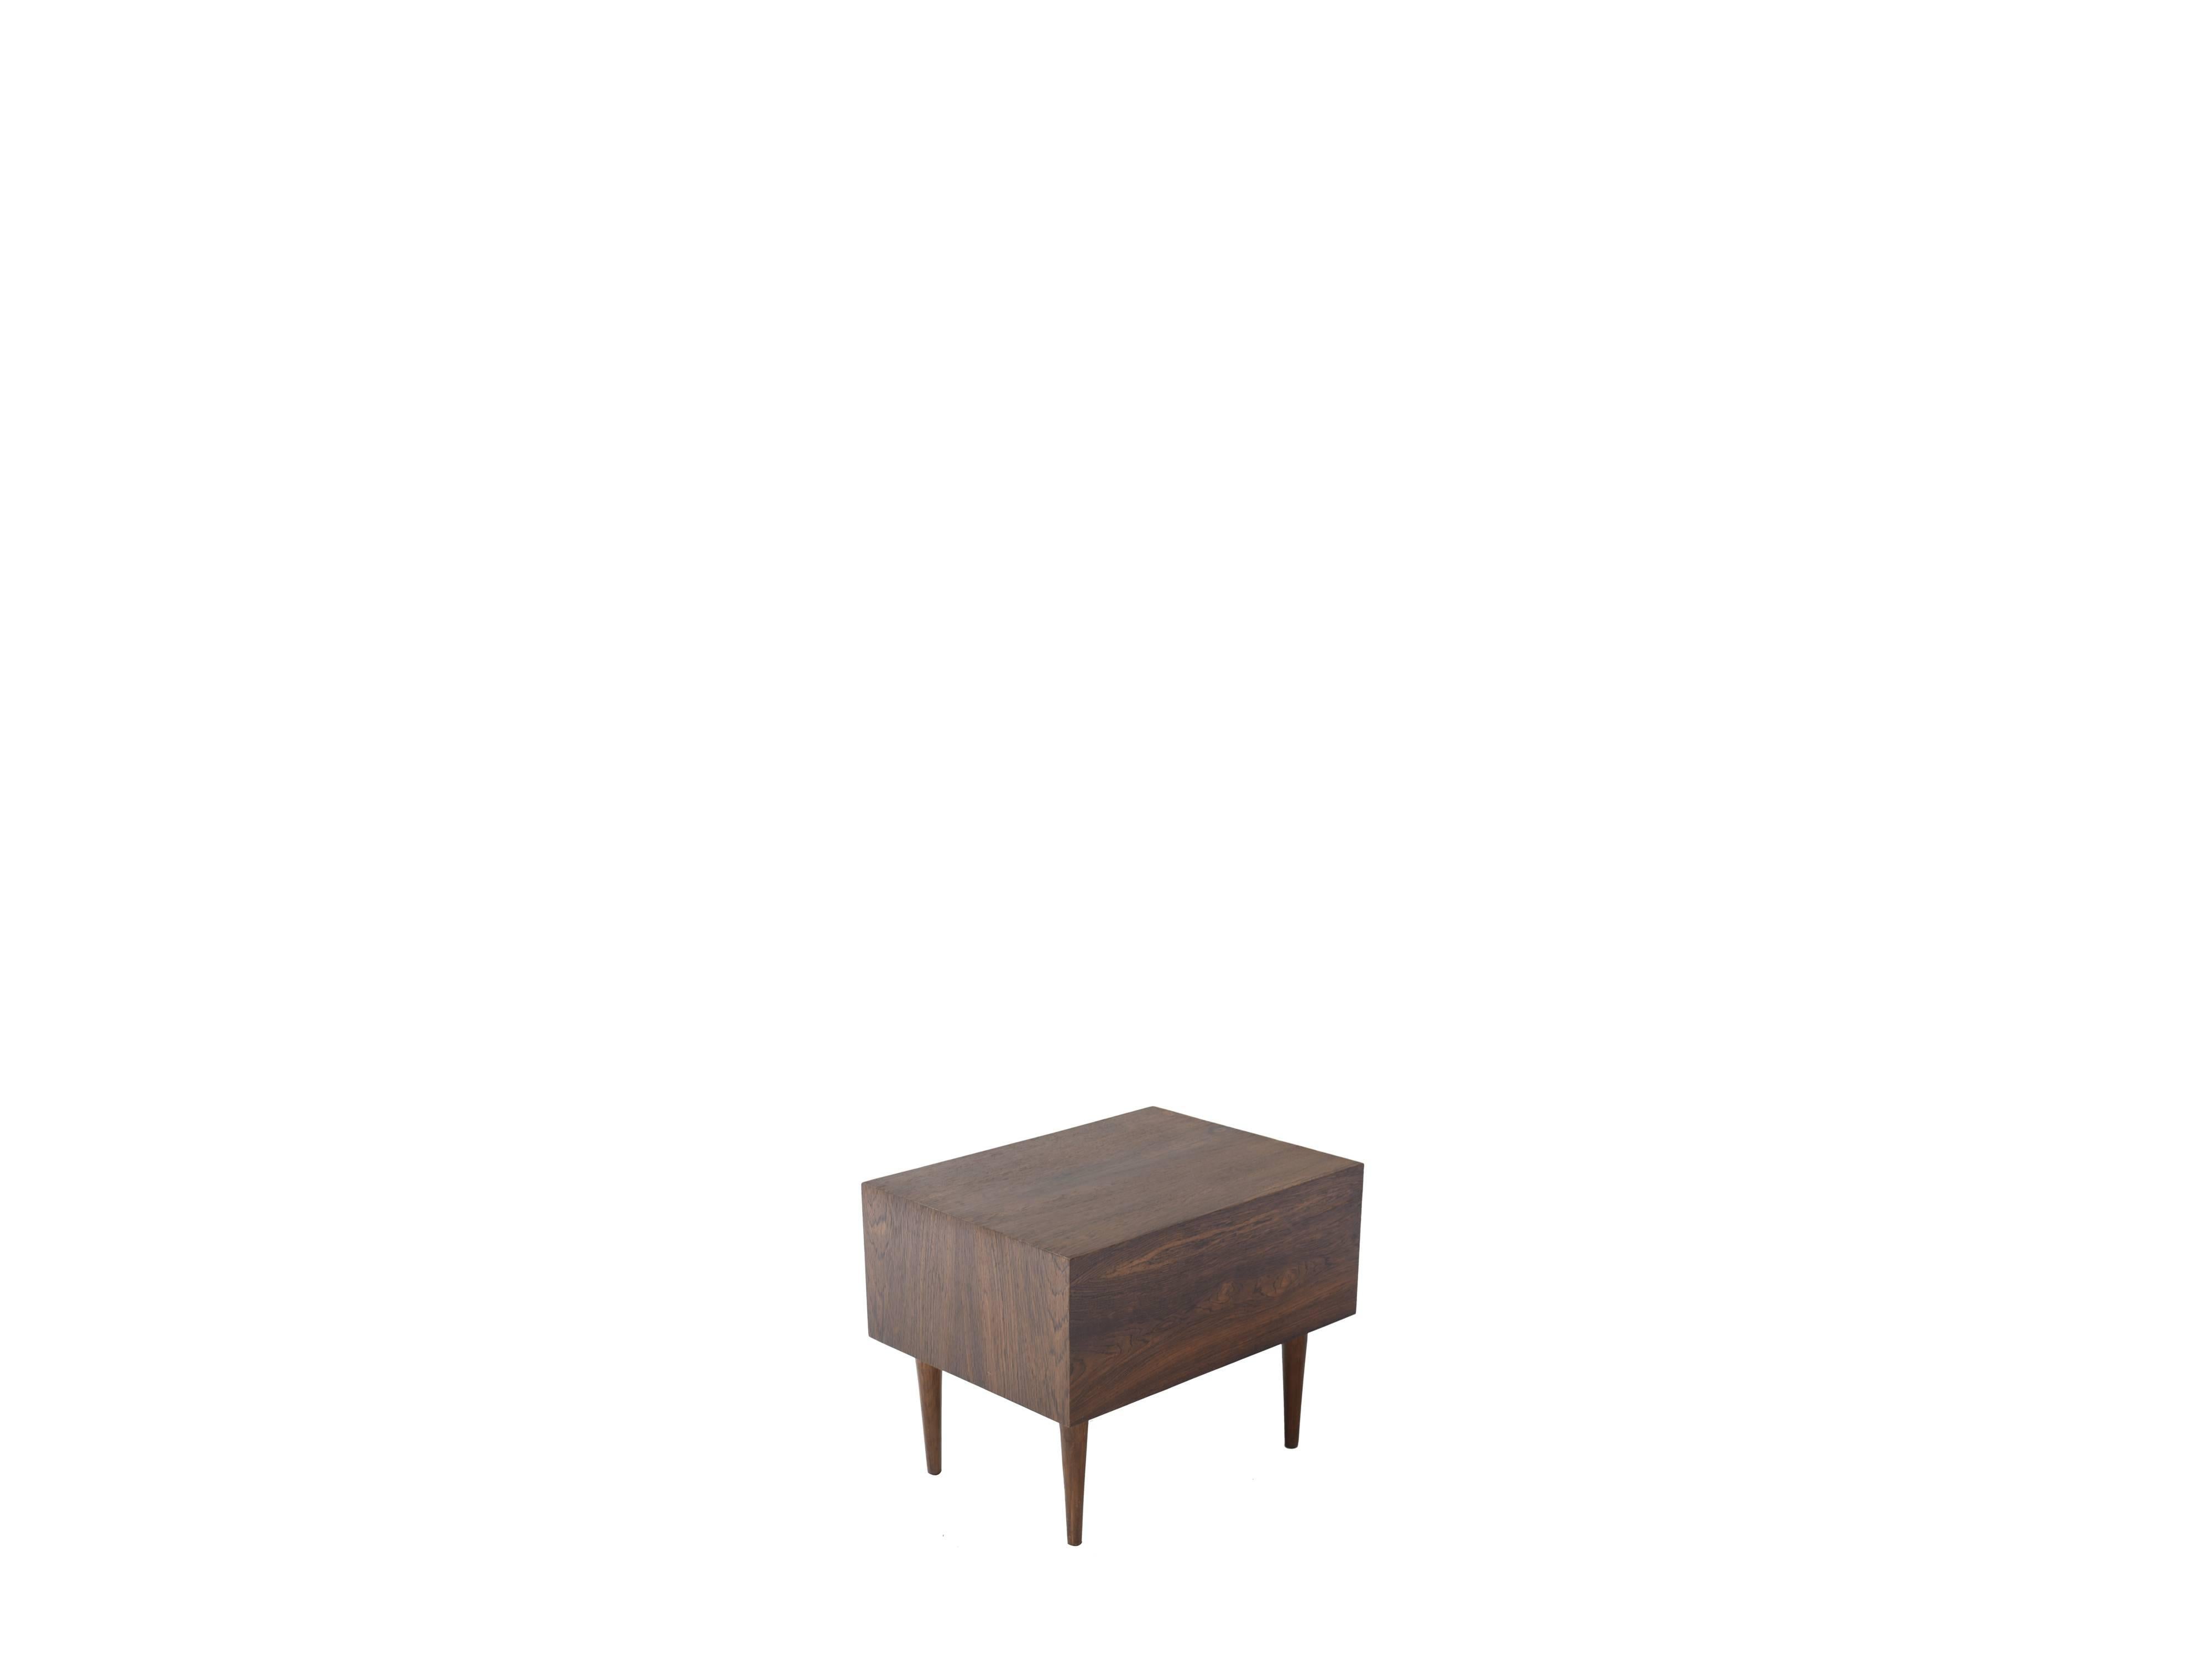 Geraldo de Barros designed this nightstand in the period of Unilabor, the first Brazilian cooperative.

This little nightstand draws attention for its simplicity and beauty. It is veneered in rosewood and the charming drawer with white melamine